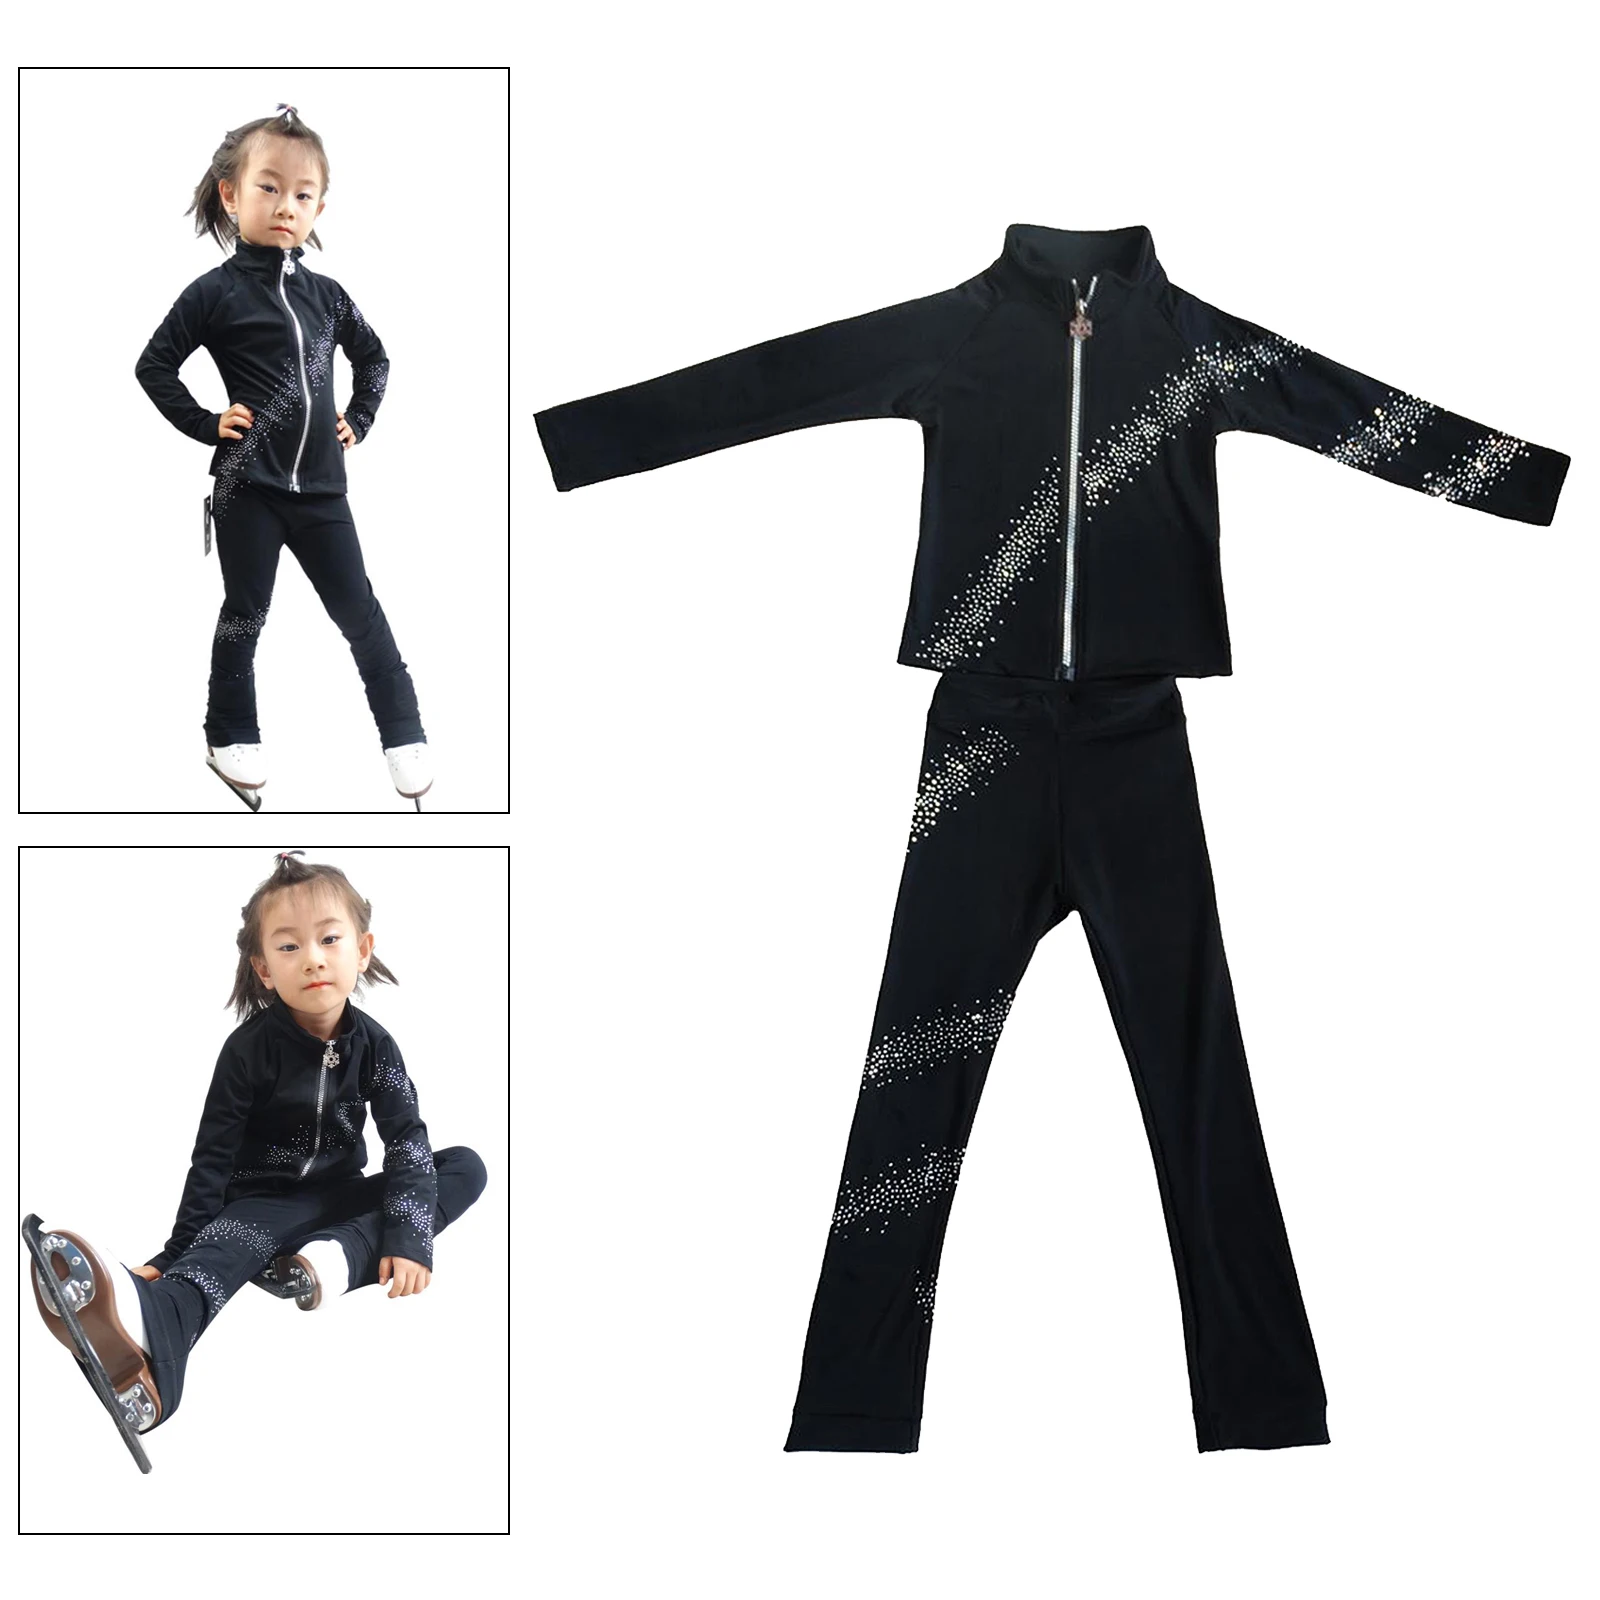 

Stretchy Skating Outfit Warm Lining Jacket Coat Pants Set for Women Girls Junior Skater Skate Training Clothes Sportswear